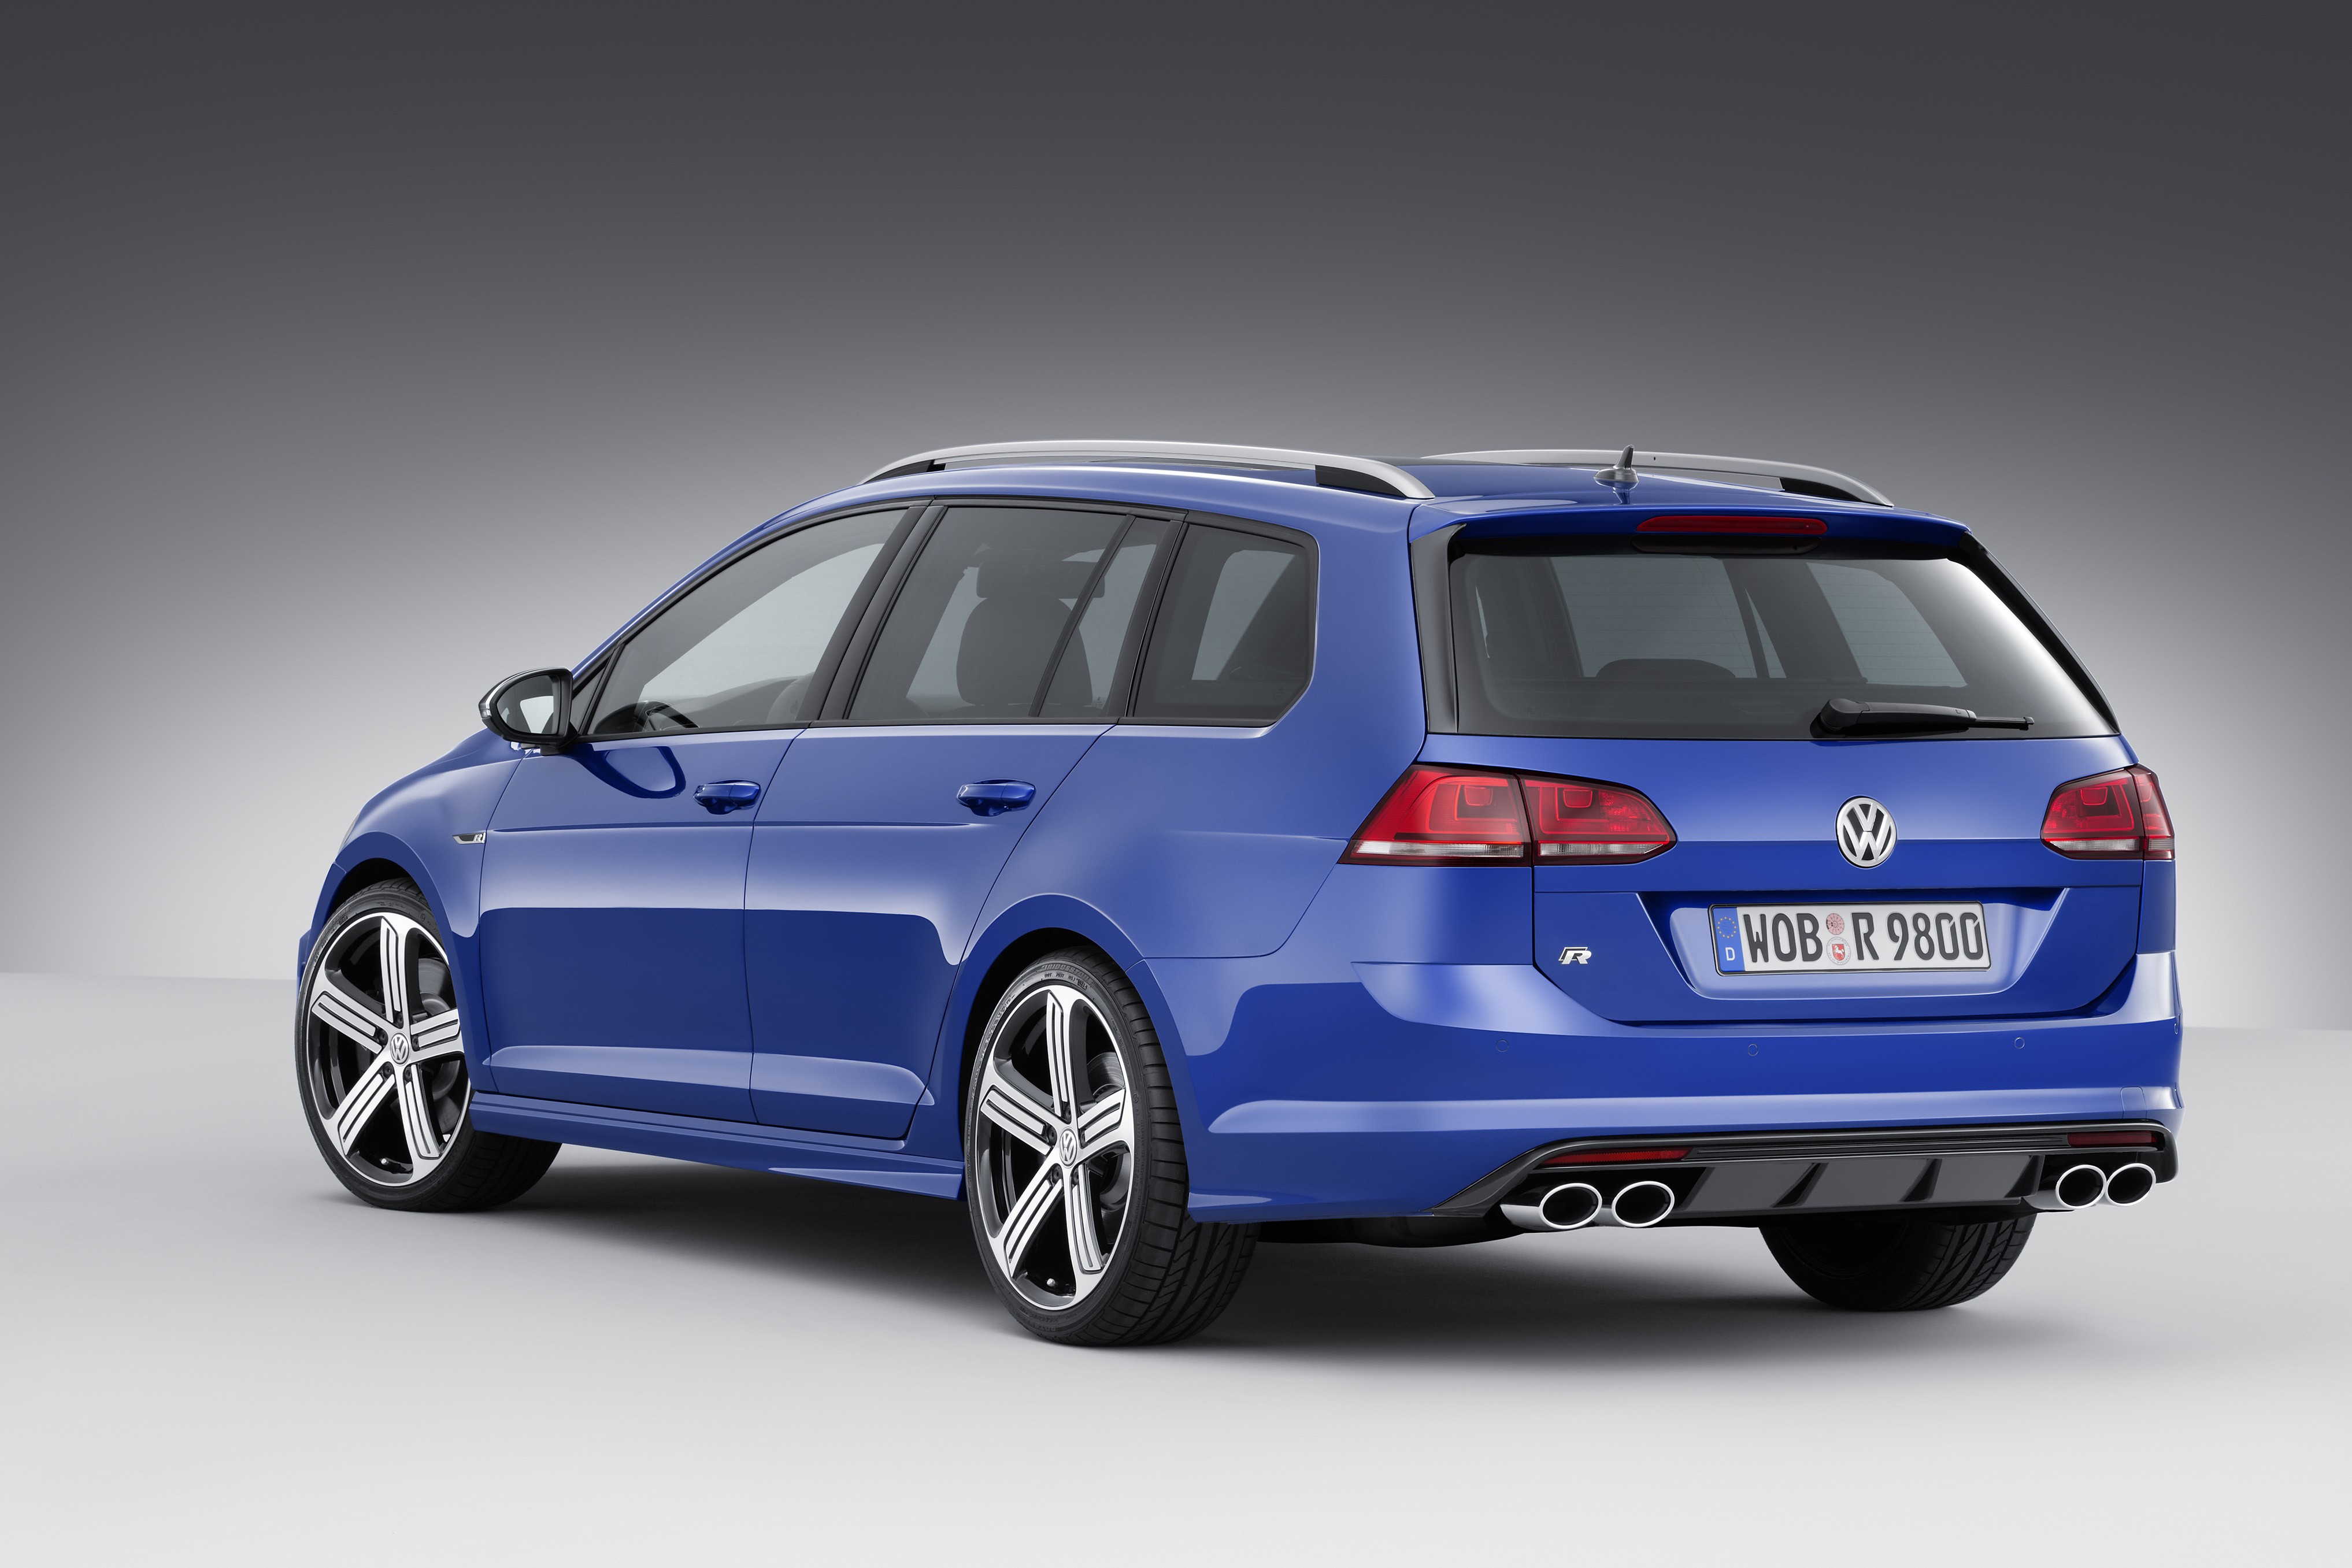 Volkswagen Golf R Variant Priced at €43,000, Goes on Sale with